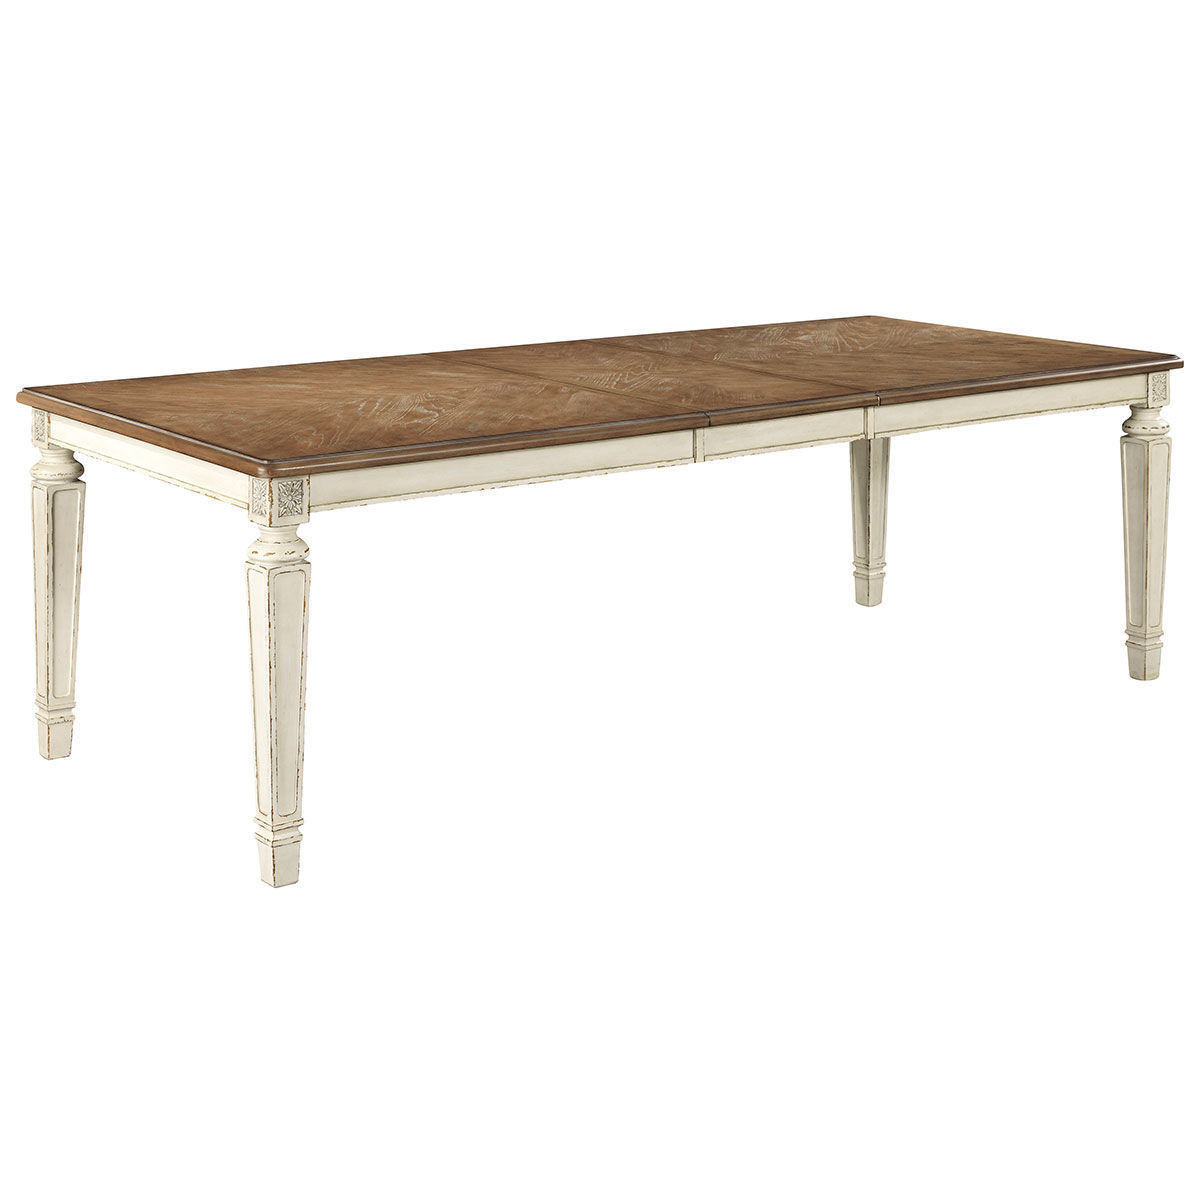 Picture of ROSLYN RECT DINING TABLE